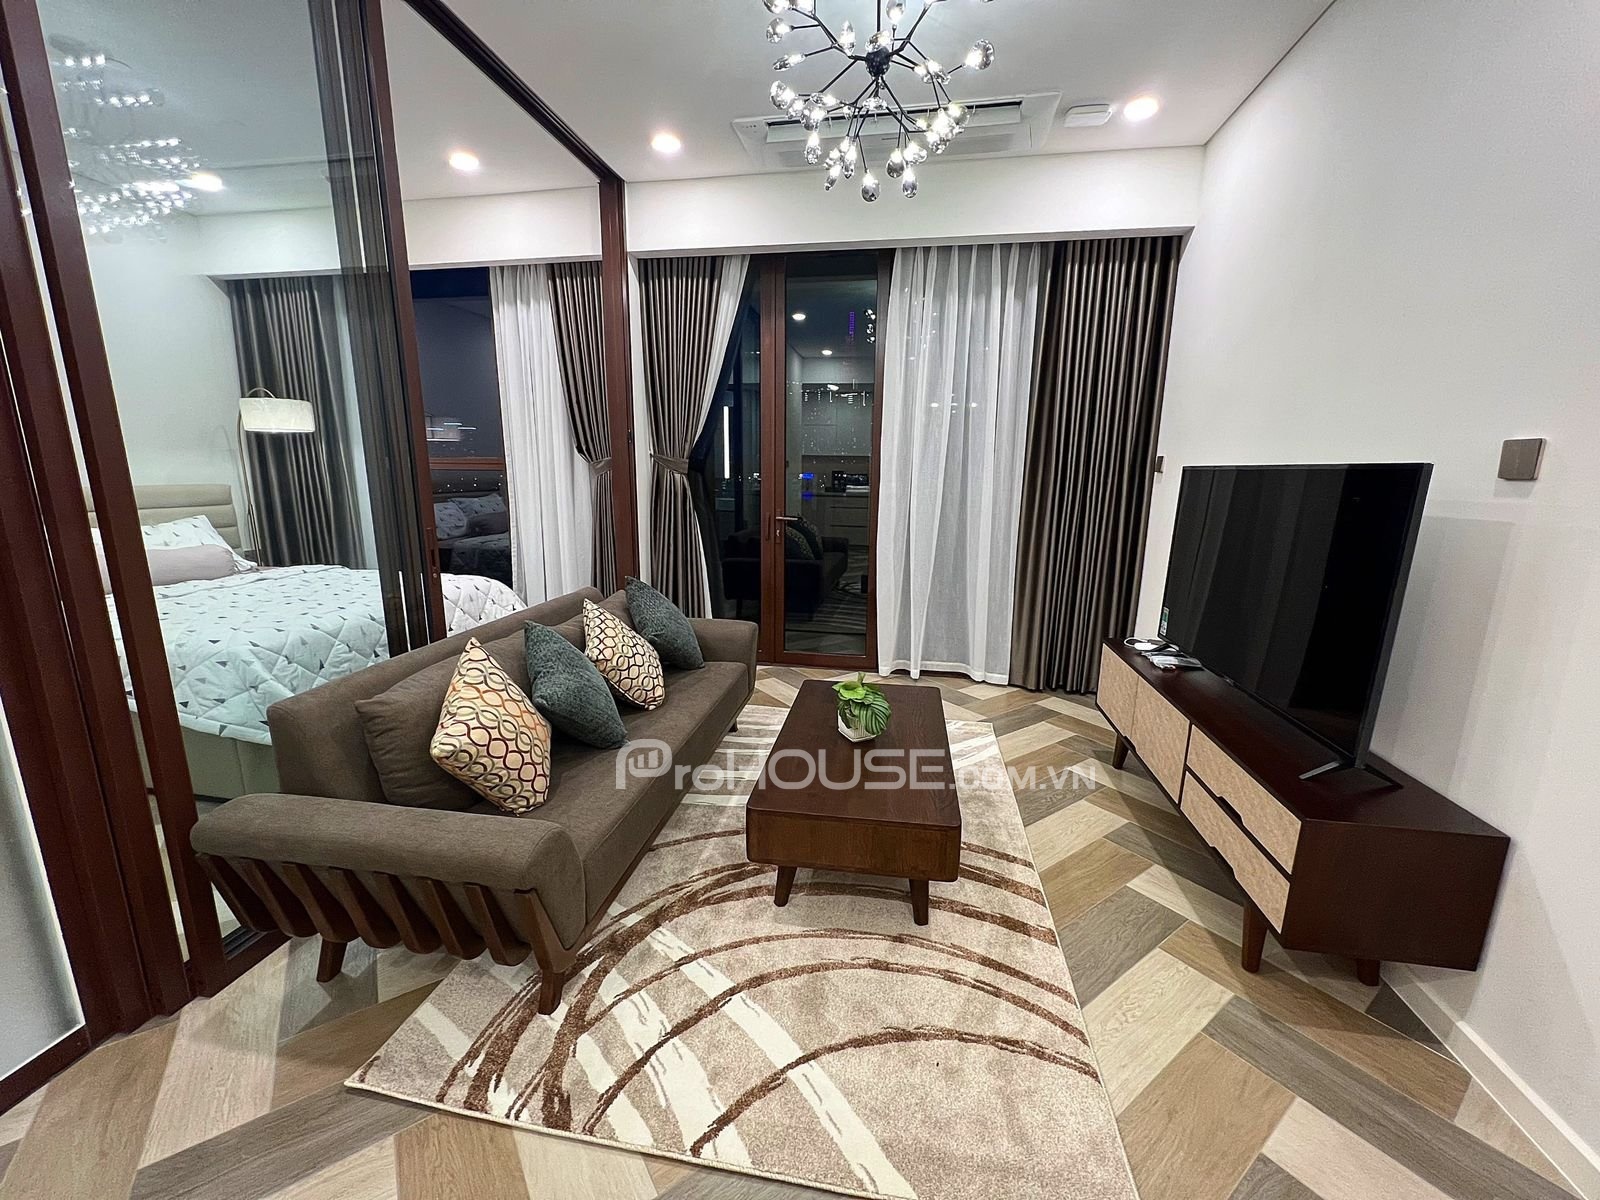 1 bedroom luxury apartment for rent in The Metropole with full furniture